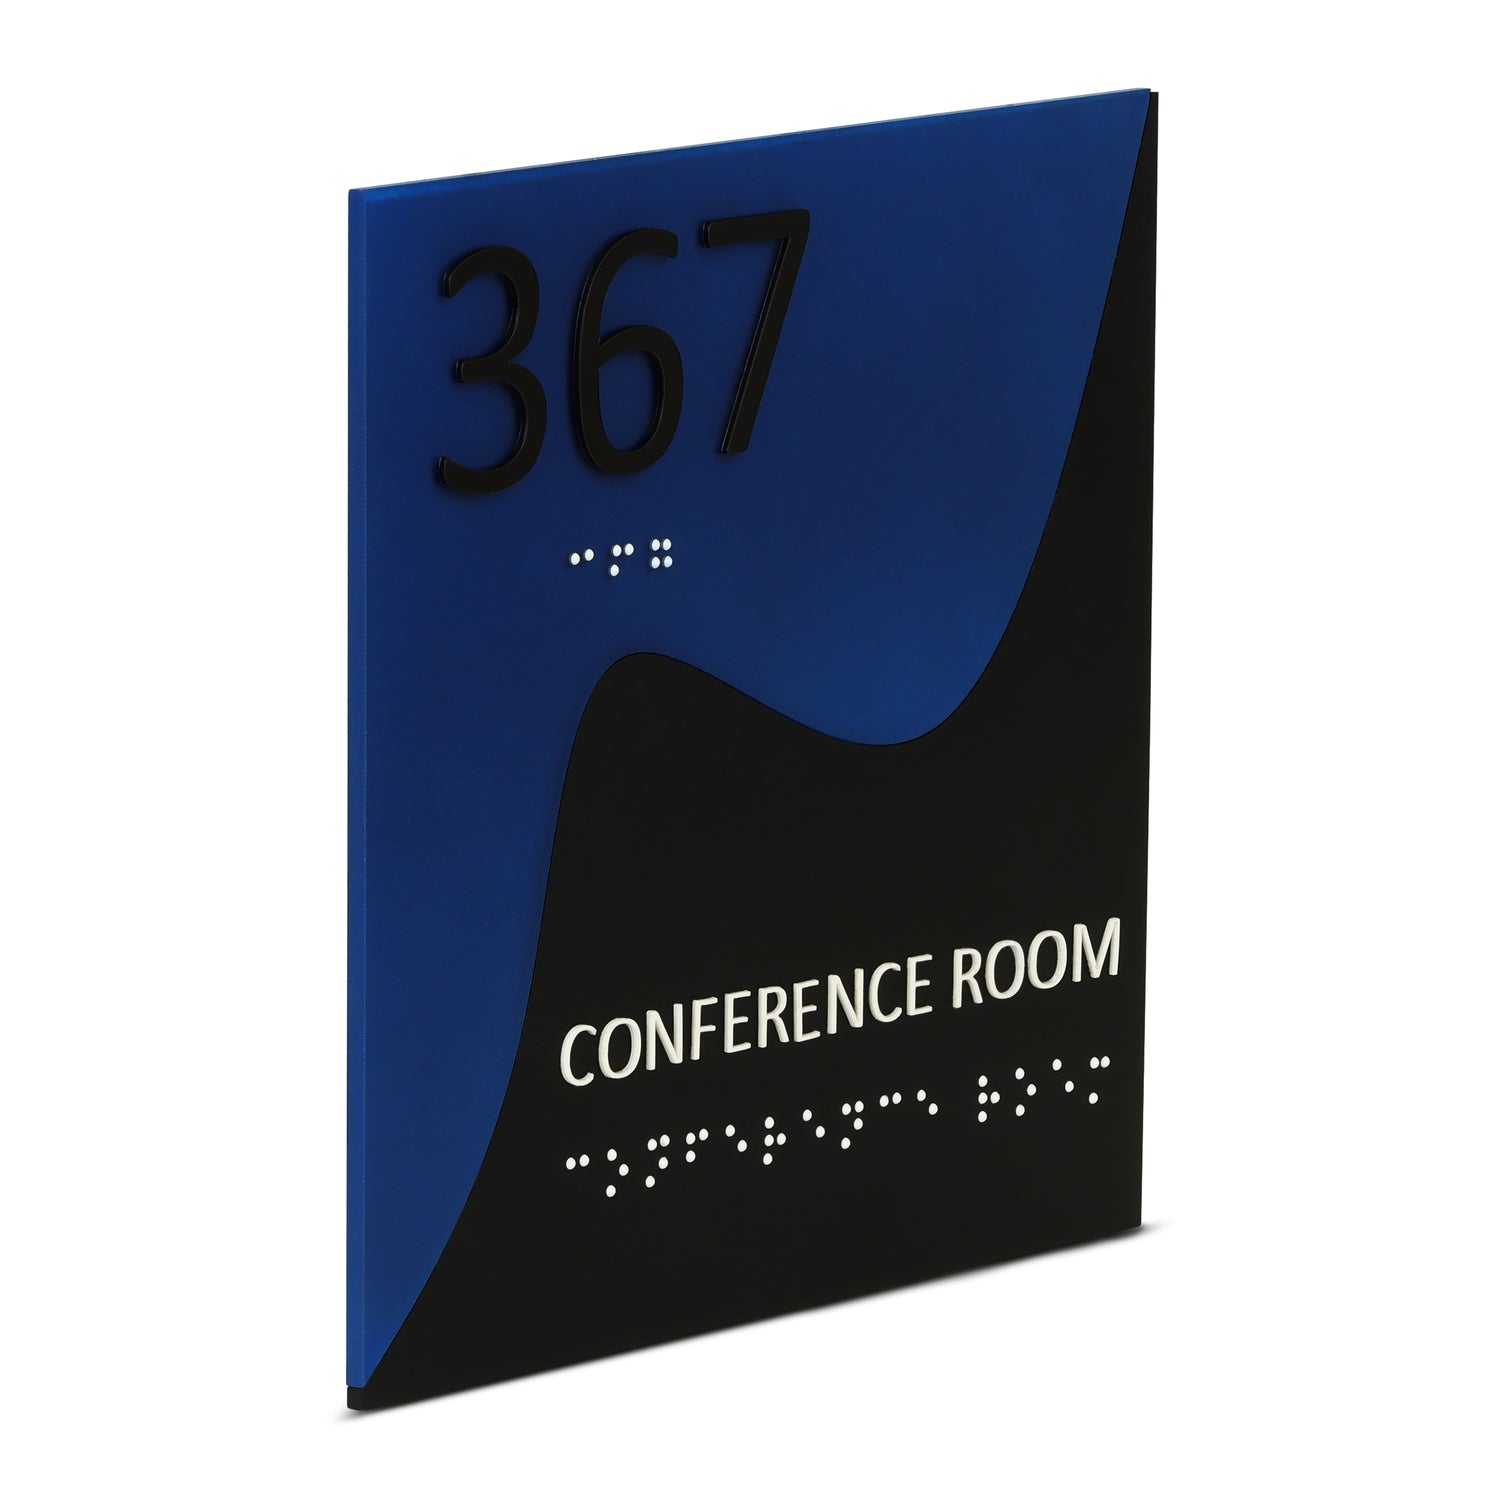 367 Conference Room Signage